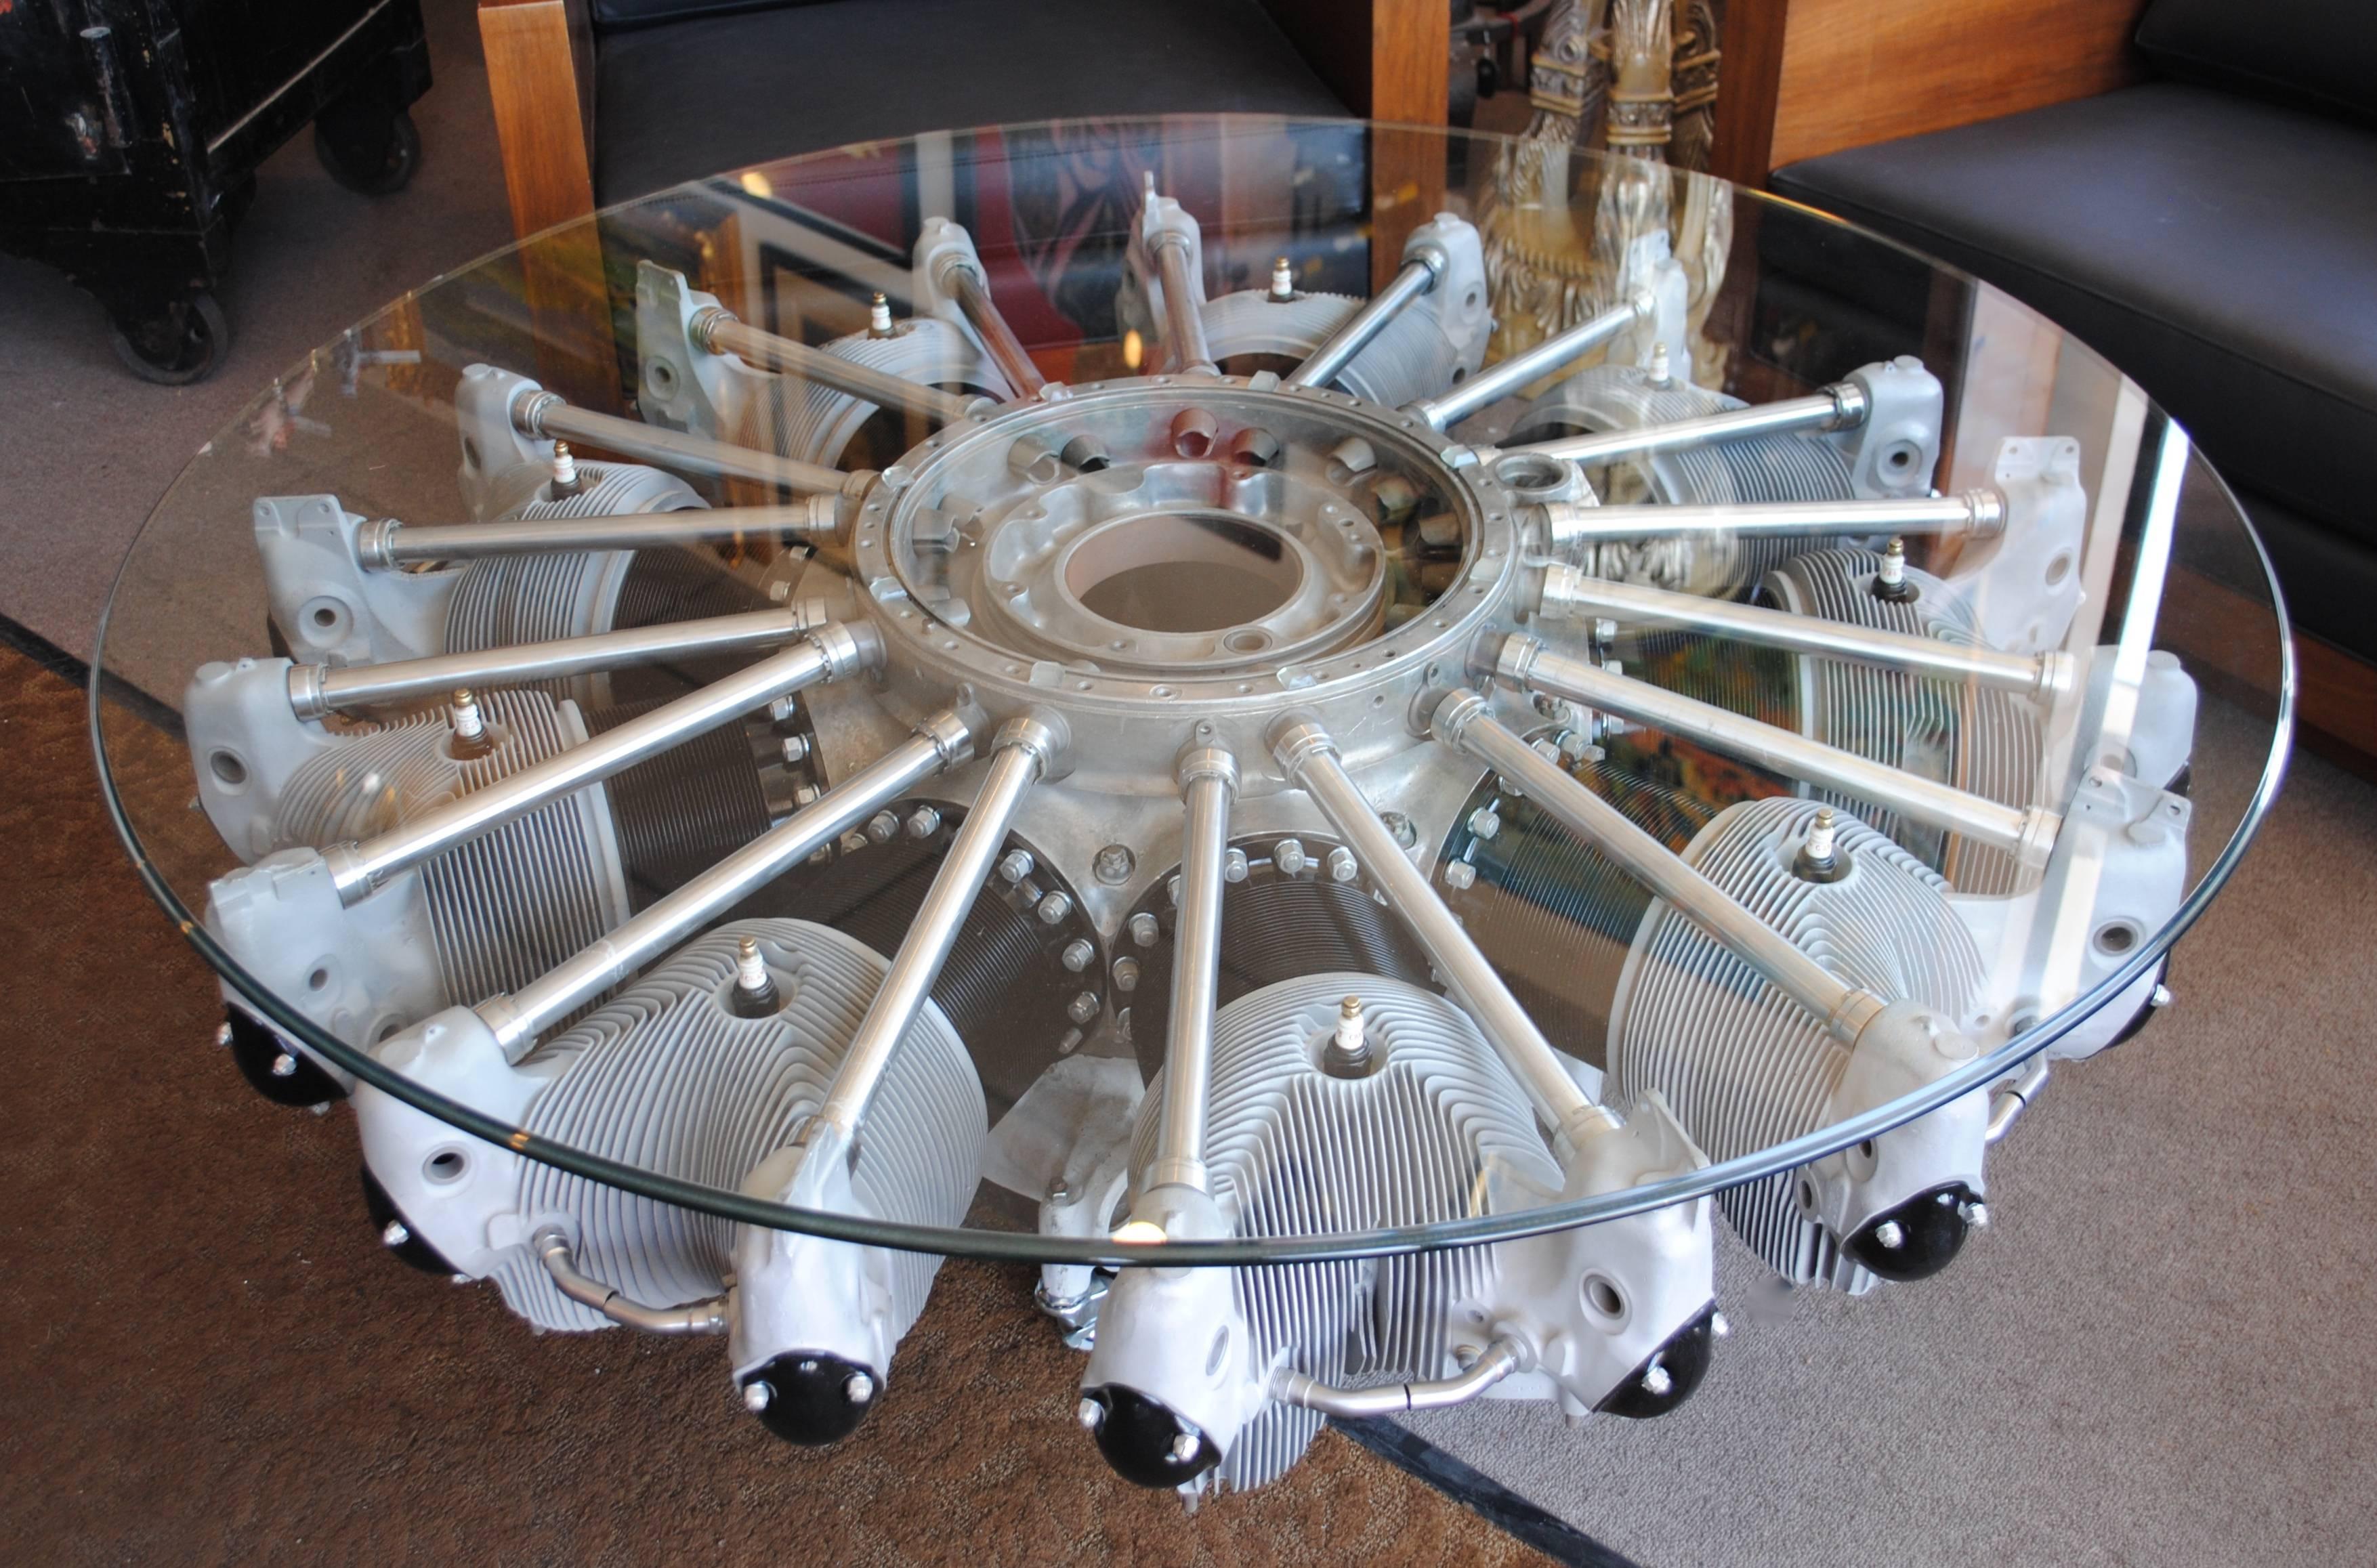 Nine cylinder radial aircraft engine coffee table. It has been beautifully finished and is topped with a 54